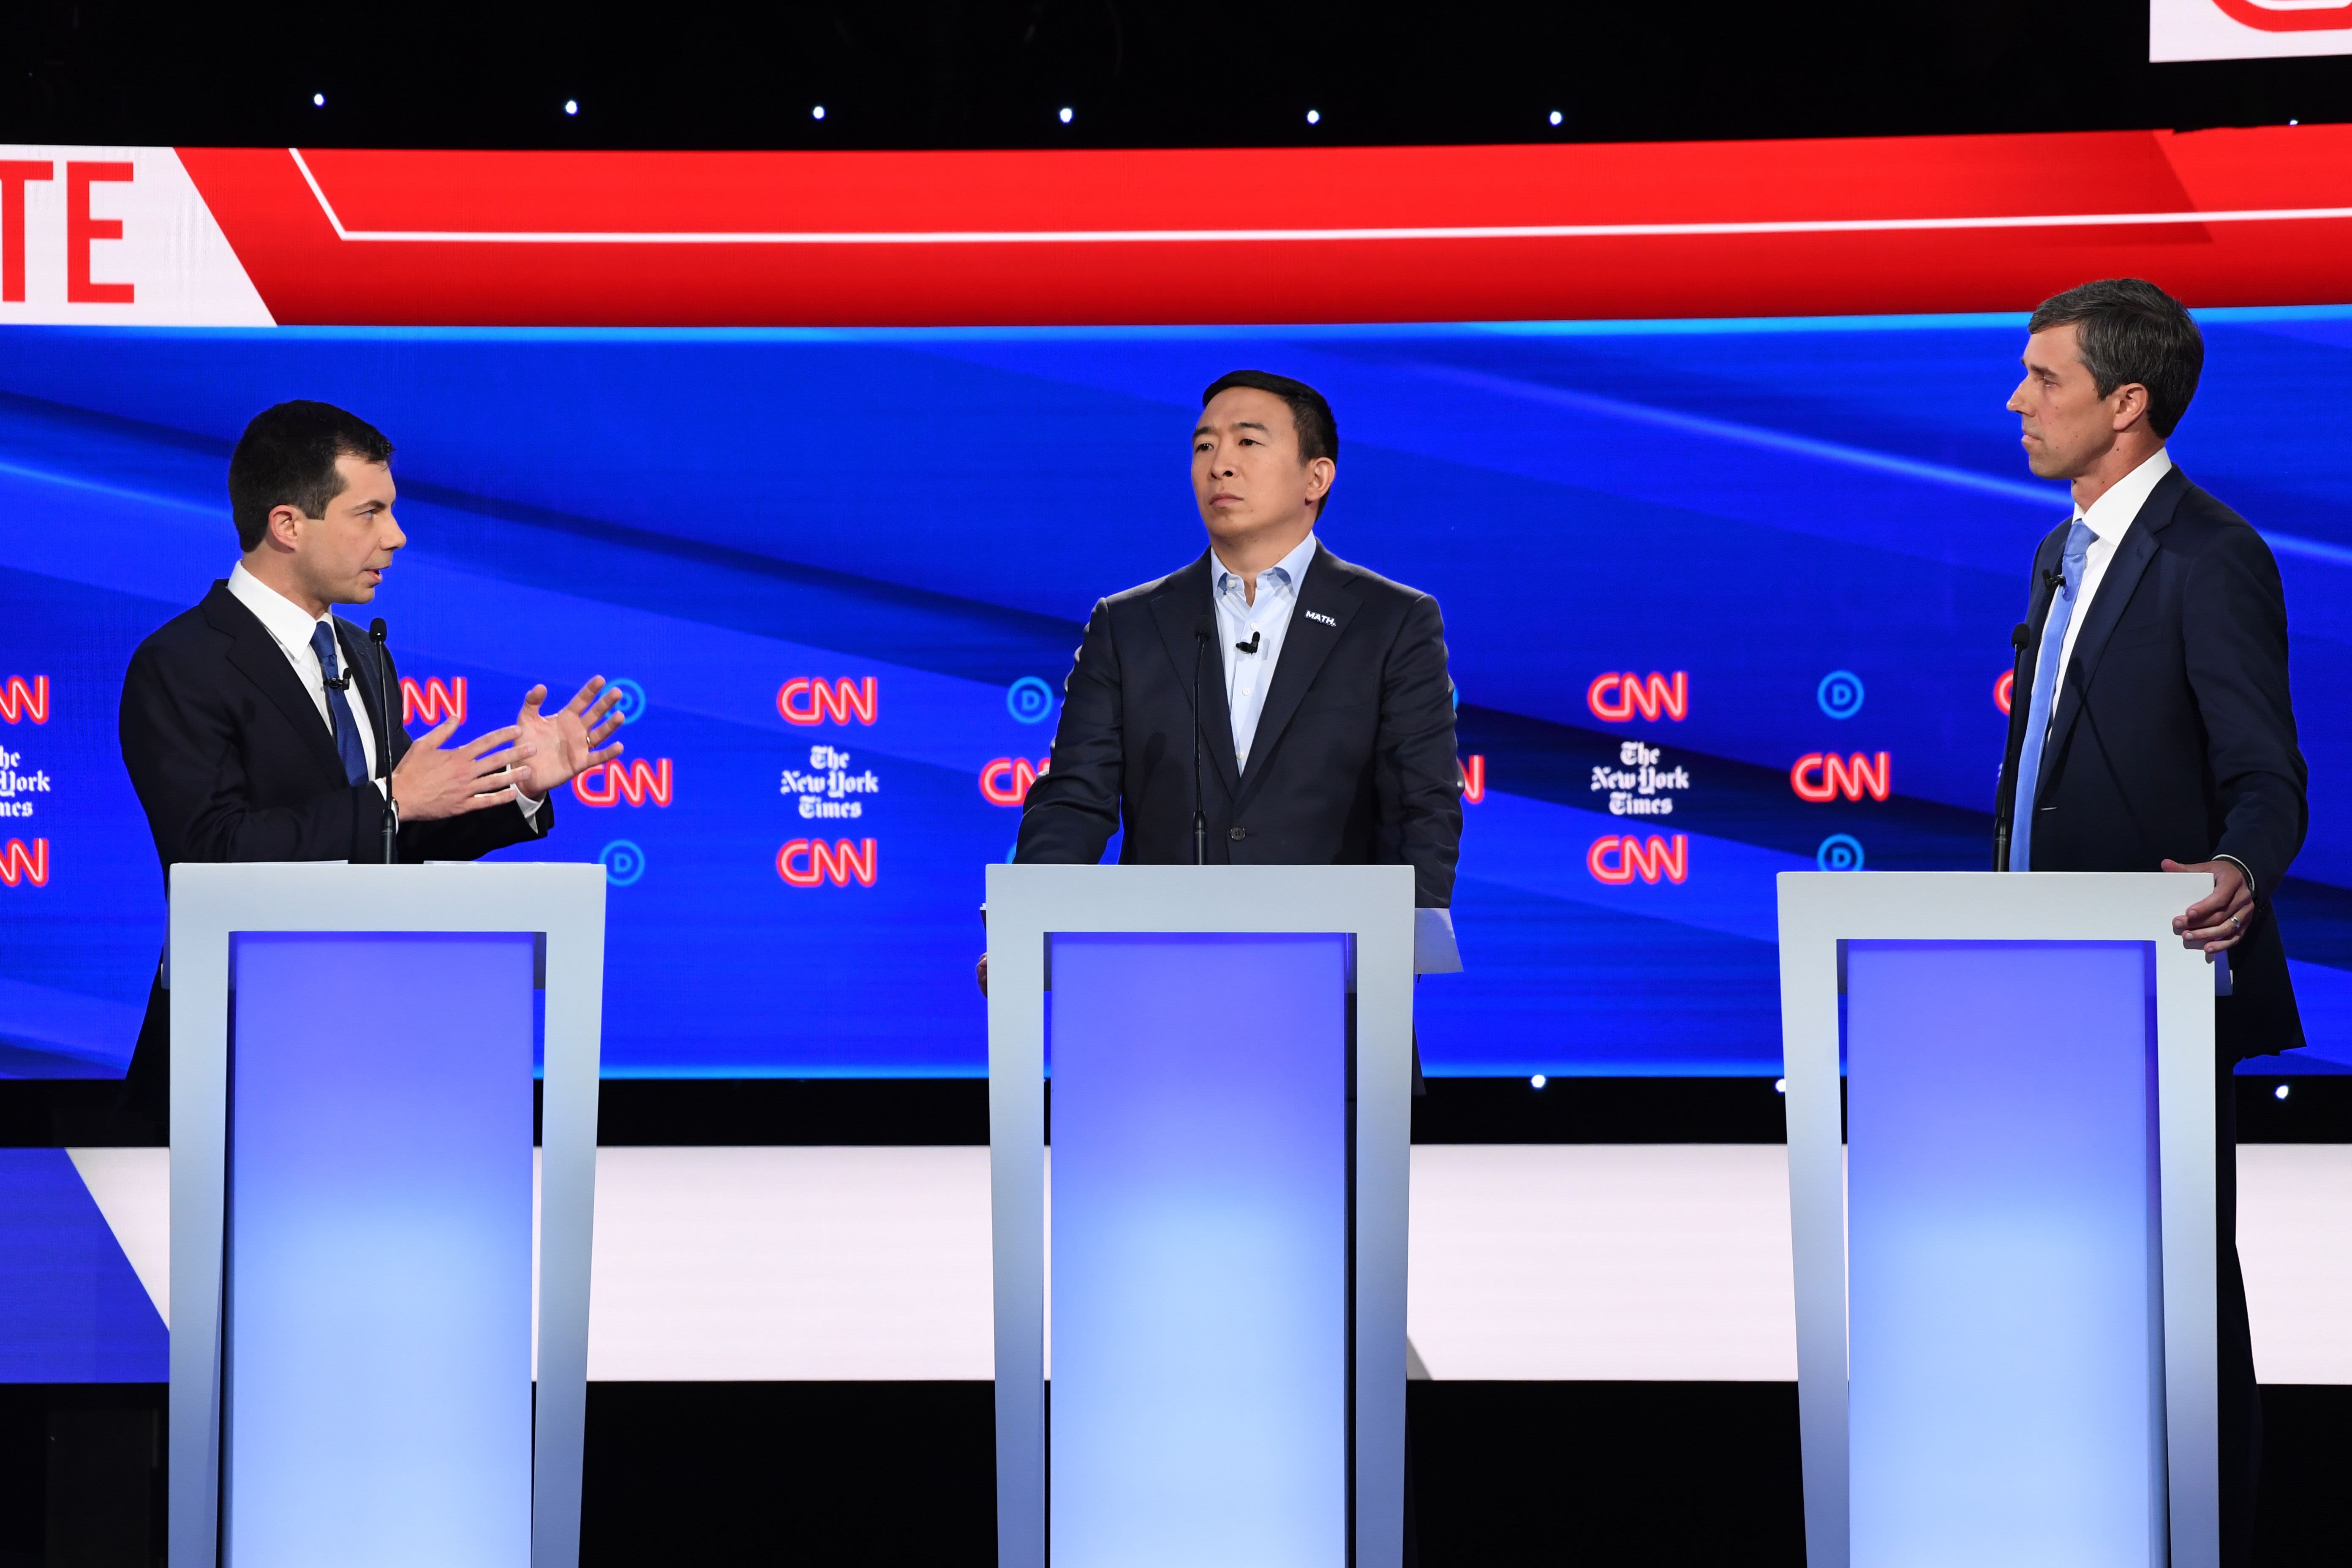 Big Tech had its first big debate moment, and Democrats came out swinging